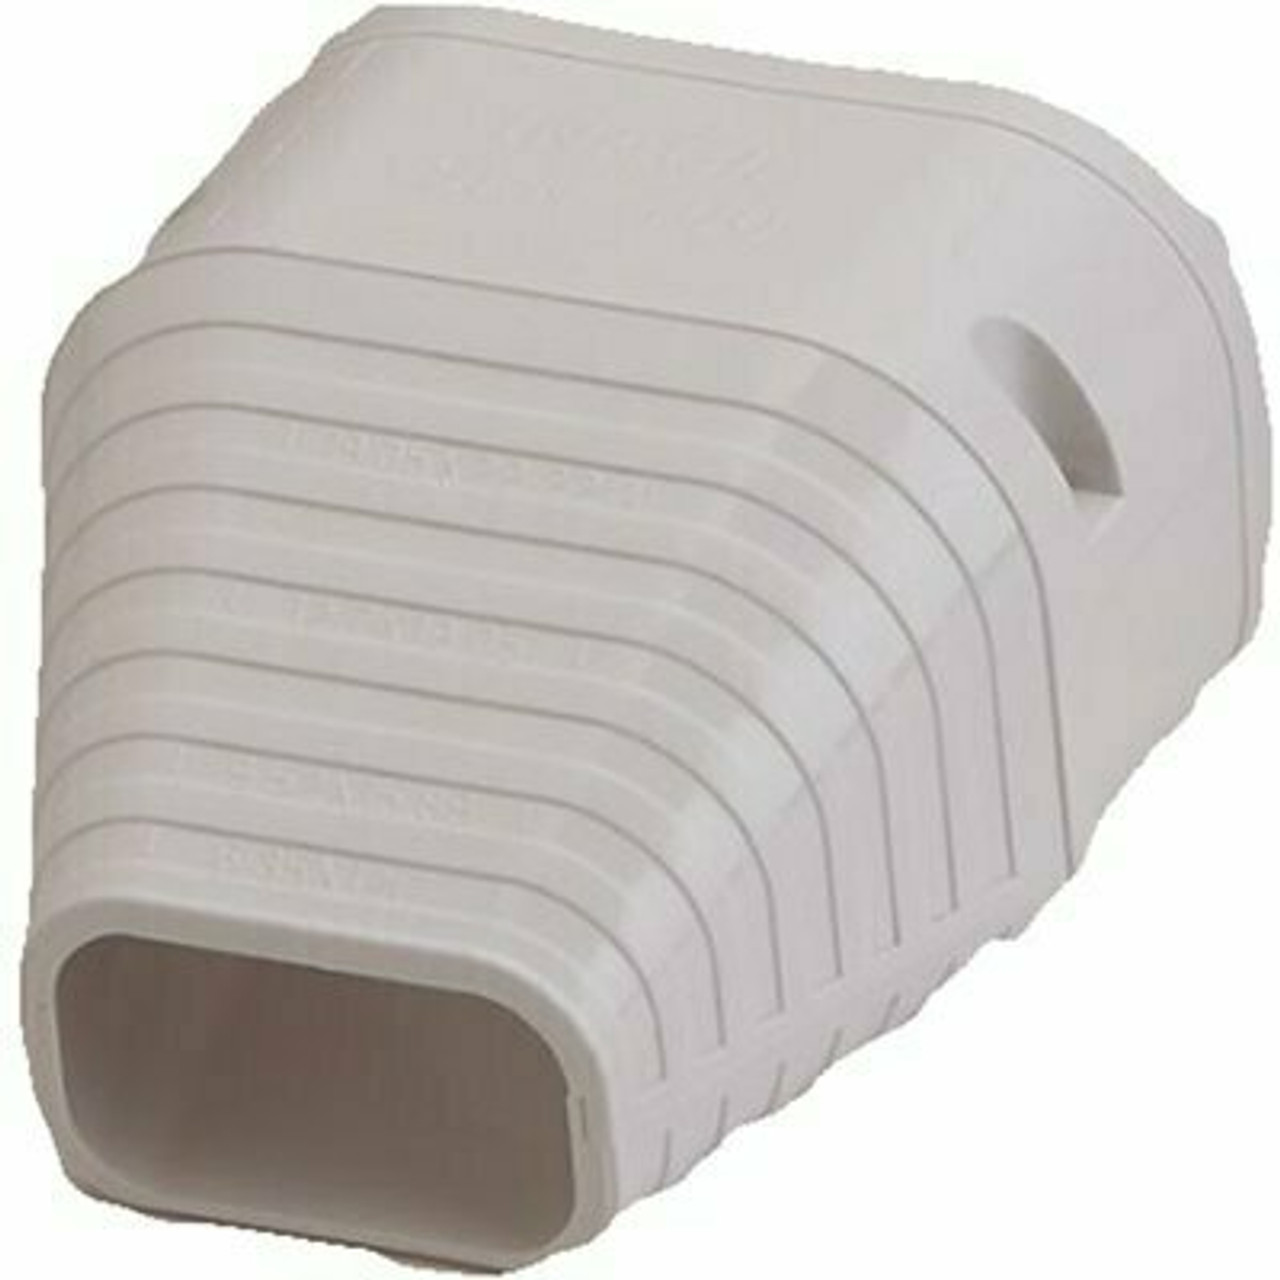 Rectorseal Slimduct End Fitting In White